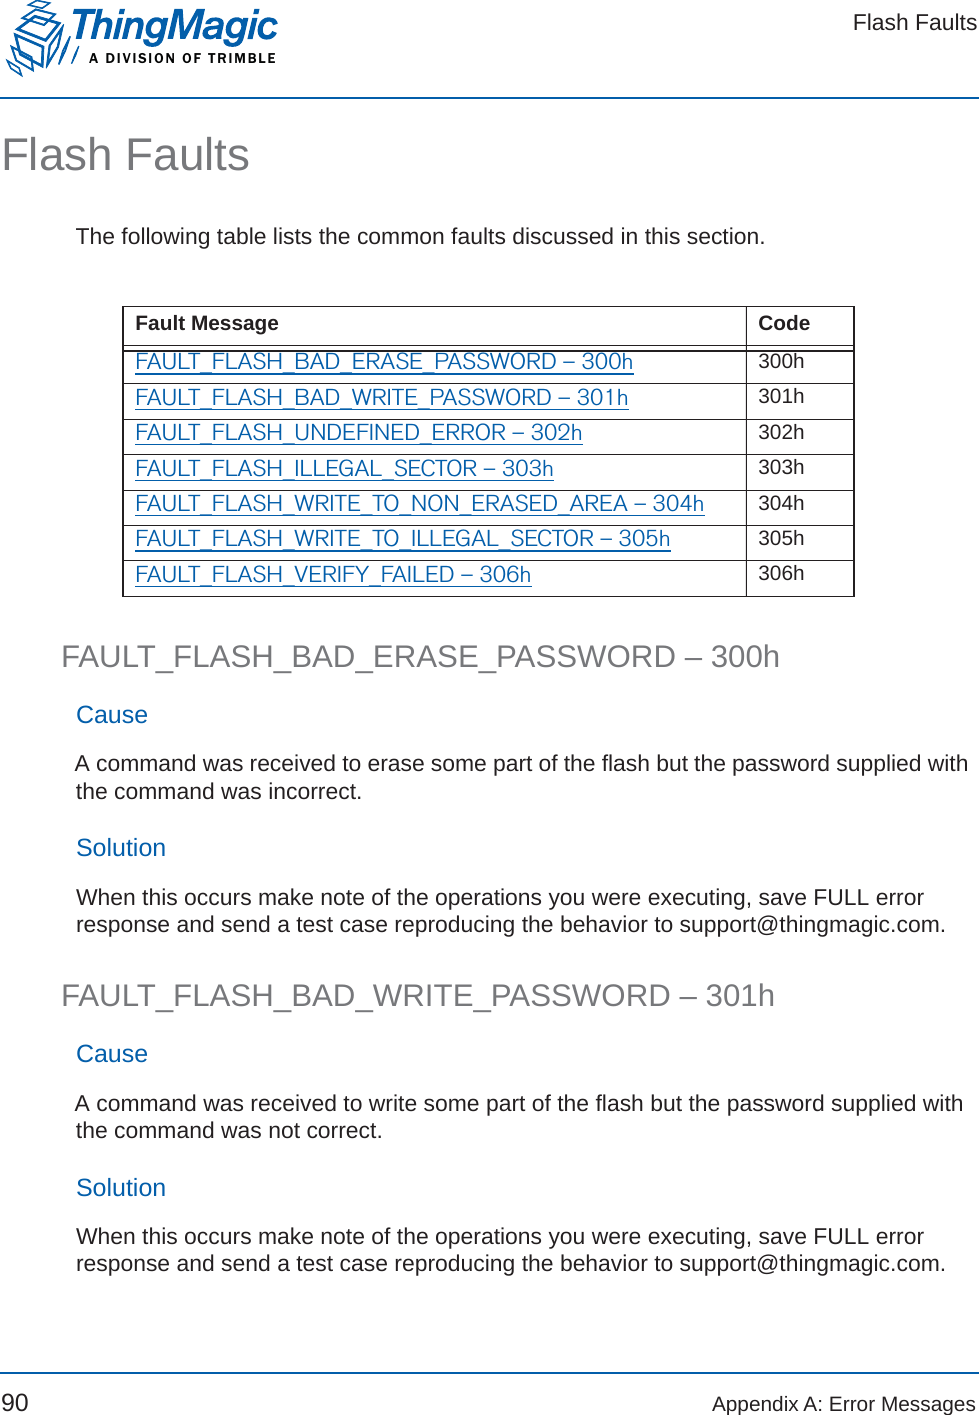 Flash FaultsA DIVISION OF TRIMBLE90 Appendix A: Error MessagesFlash FaultsThe following table lists the common faults discussed in this section.FAULT_FLASH_BAD_ERASE_PASSWORD – 300hCauseA command was received to erase some part of the flash but the password supplied with the command was incorrect.SolutionWhen this occurs make note of the operations you were executing, save FULL error response and send a test case reproducing the behavior to support@thingmagic.com.FAULT_FLASH_BAD_WRITE_PASSWORD – 301hCauseA command was received to write some part of the flash but the password supplied with the command was not correct.SolutionWhen this occurs make note of the operations you were executing, save FULL error response and send a test case reproducing the behavior to support@thingmagic.com.Fault Message CodeFAULT_FLASH_BAD_ERASE_PASSWORD – 300h 300hFAULT_FLASH_BAD_WRITE_PASSWORD – 301h 301hFAULT_FLASH_UNDEFINED_ERROR – 302h 302hFAULT_FLASH_ILLEGAL_SECTOR – 303h 303hFAULT_FLASH_WRITE_TO_NON_ERASED_AREA – 304h 304hFAULT_FLASH_WRITE_TO_ILLEGAL_SECTOR – 305h 305hFAULT_FLASH_VERIFY_FAILED – 306h 306h